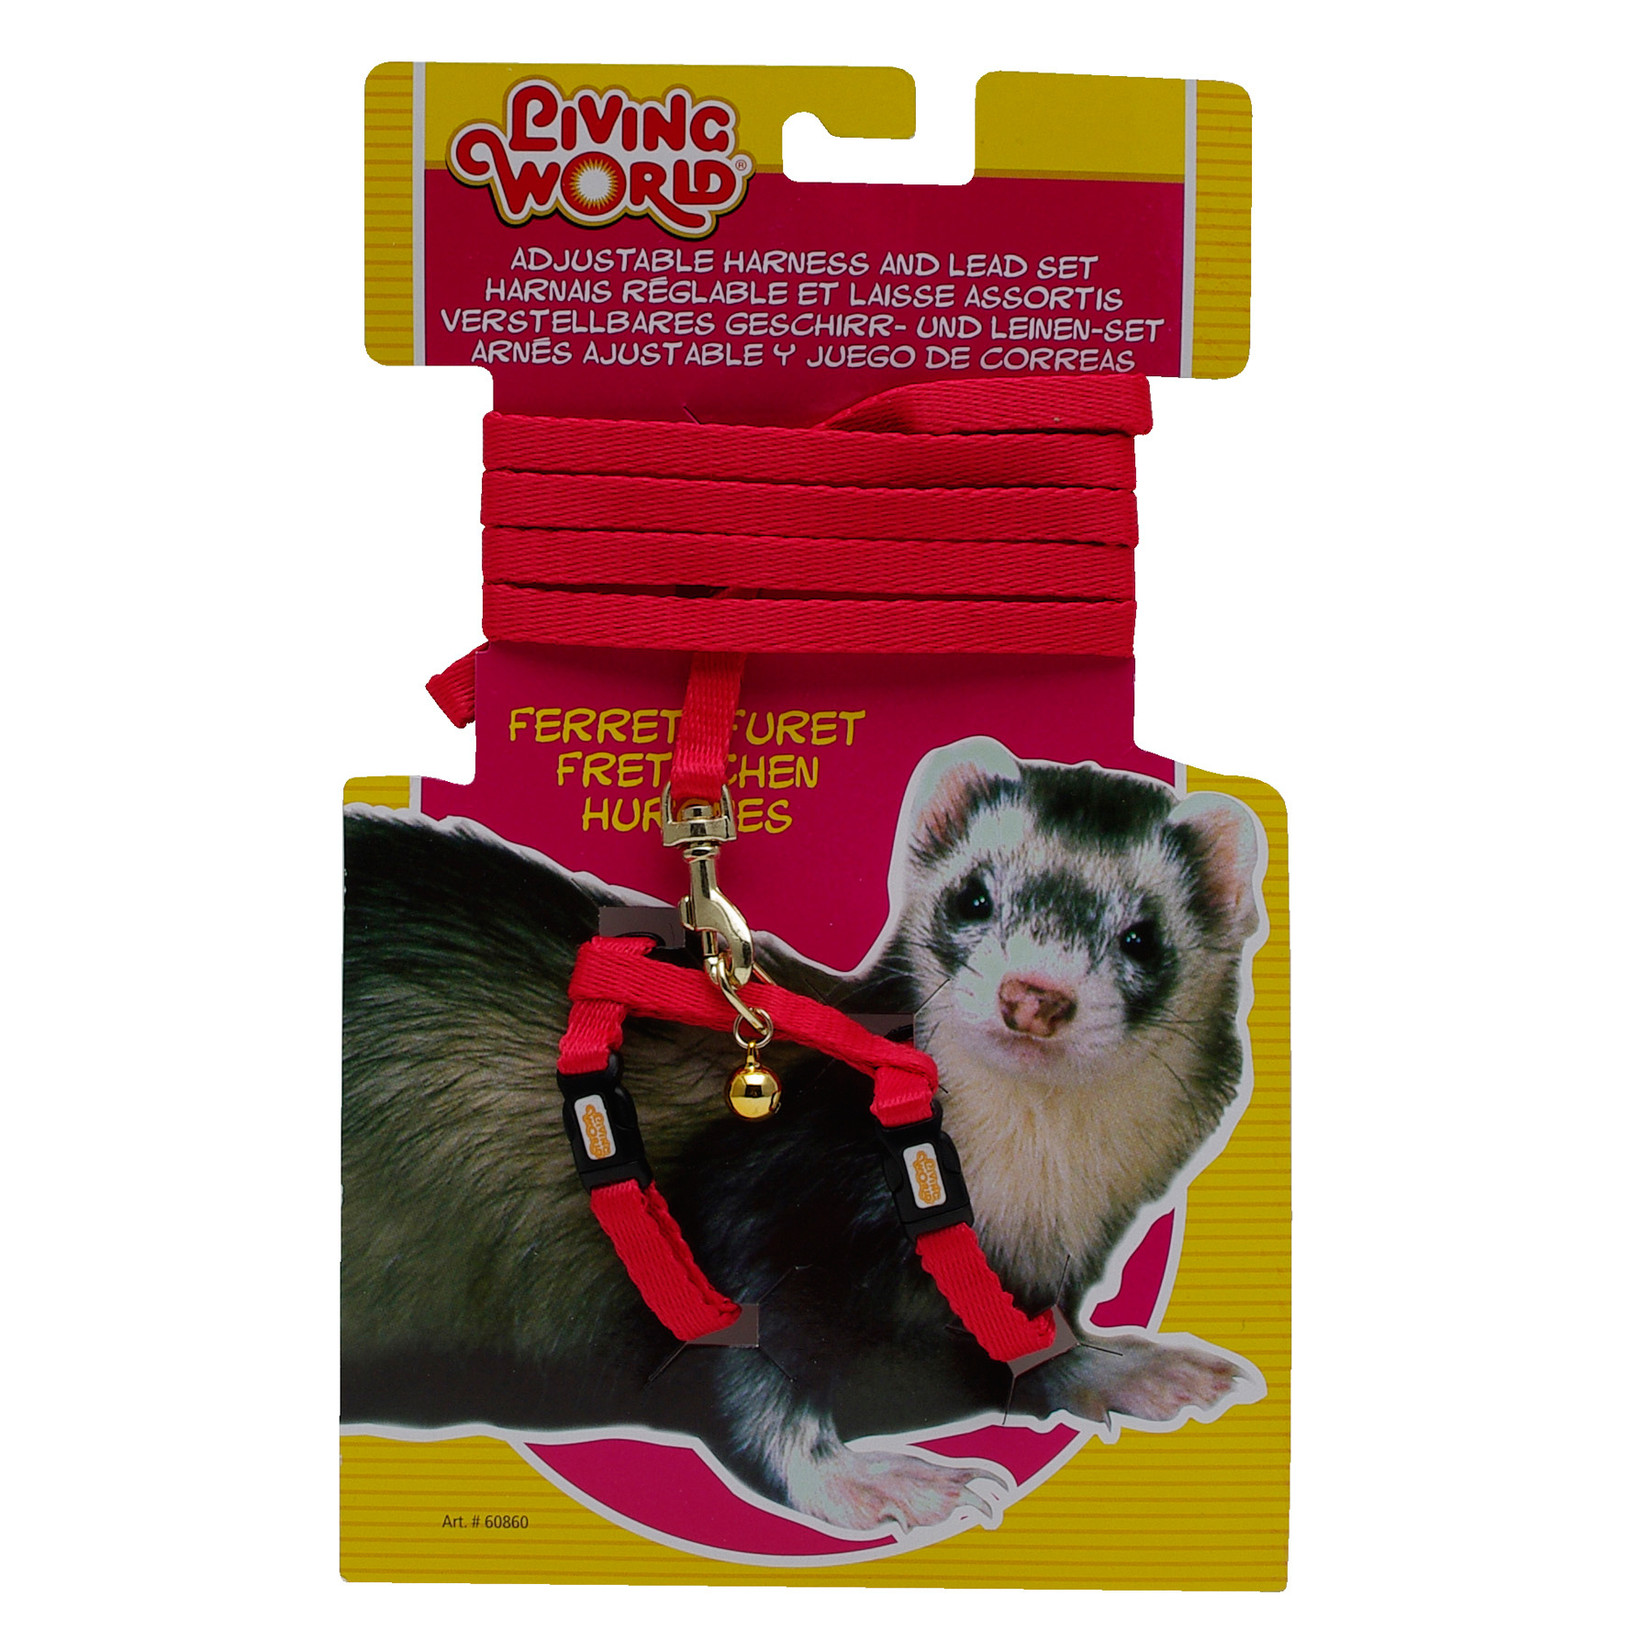 Living World Adjustable Harness and Lead Set For Ferrets - Red Lead size:  (4 ft) - Rick's Pet Stores Inc.